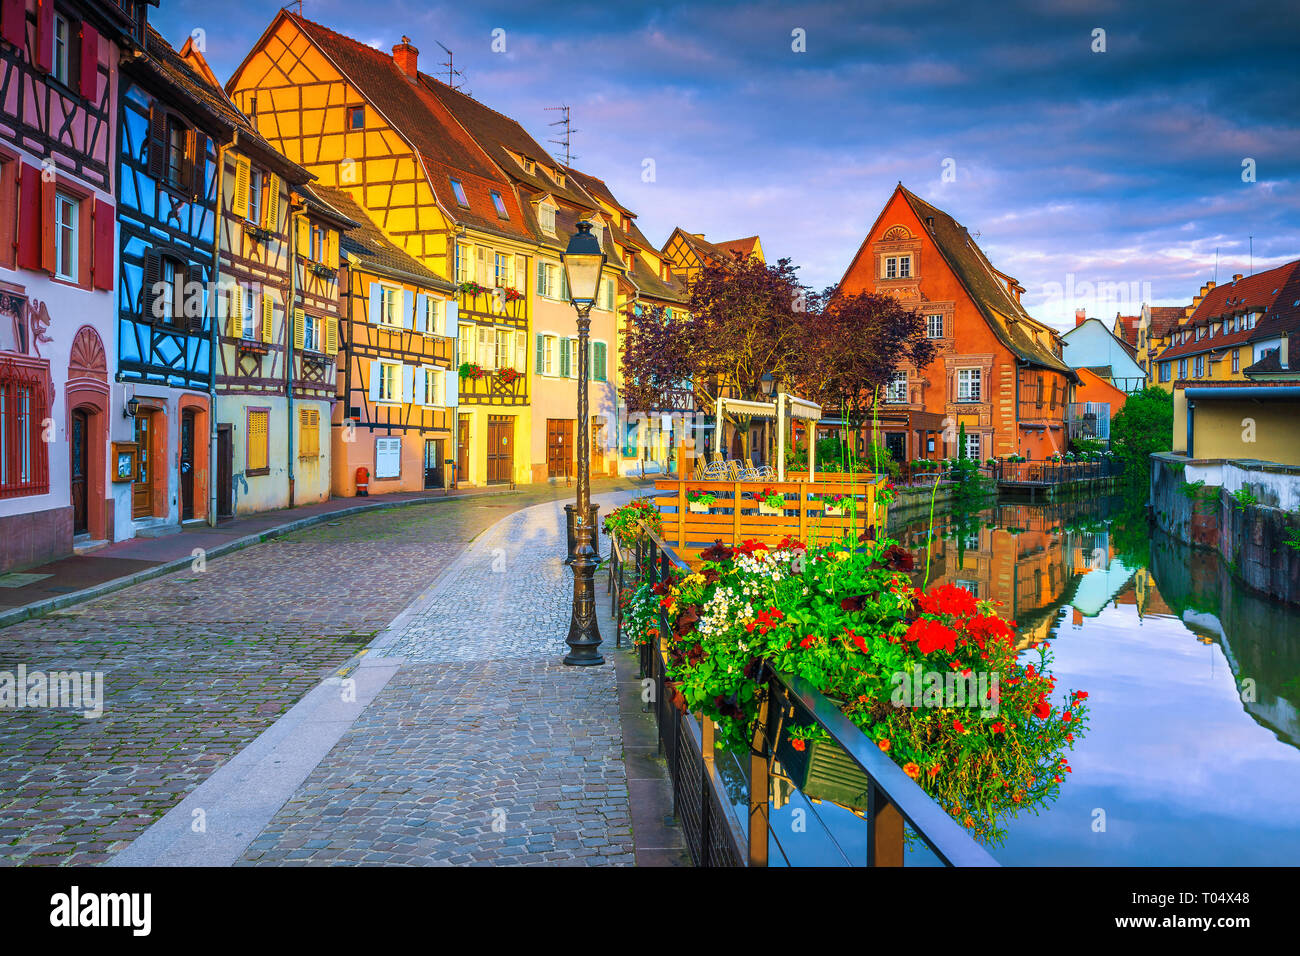 Famous summer travel destination, stunning colorful traditional houses and paved touristic street decorated with flowers at sunrise, Colmar, France, E Stock Photo